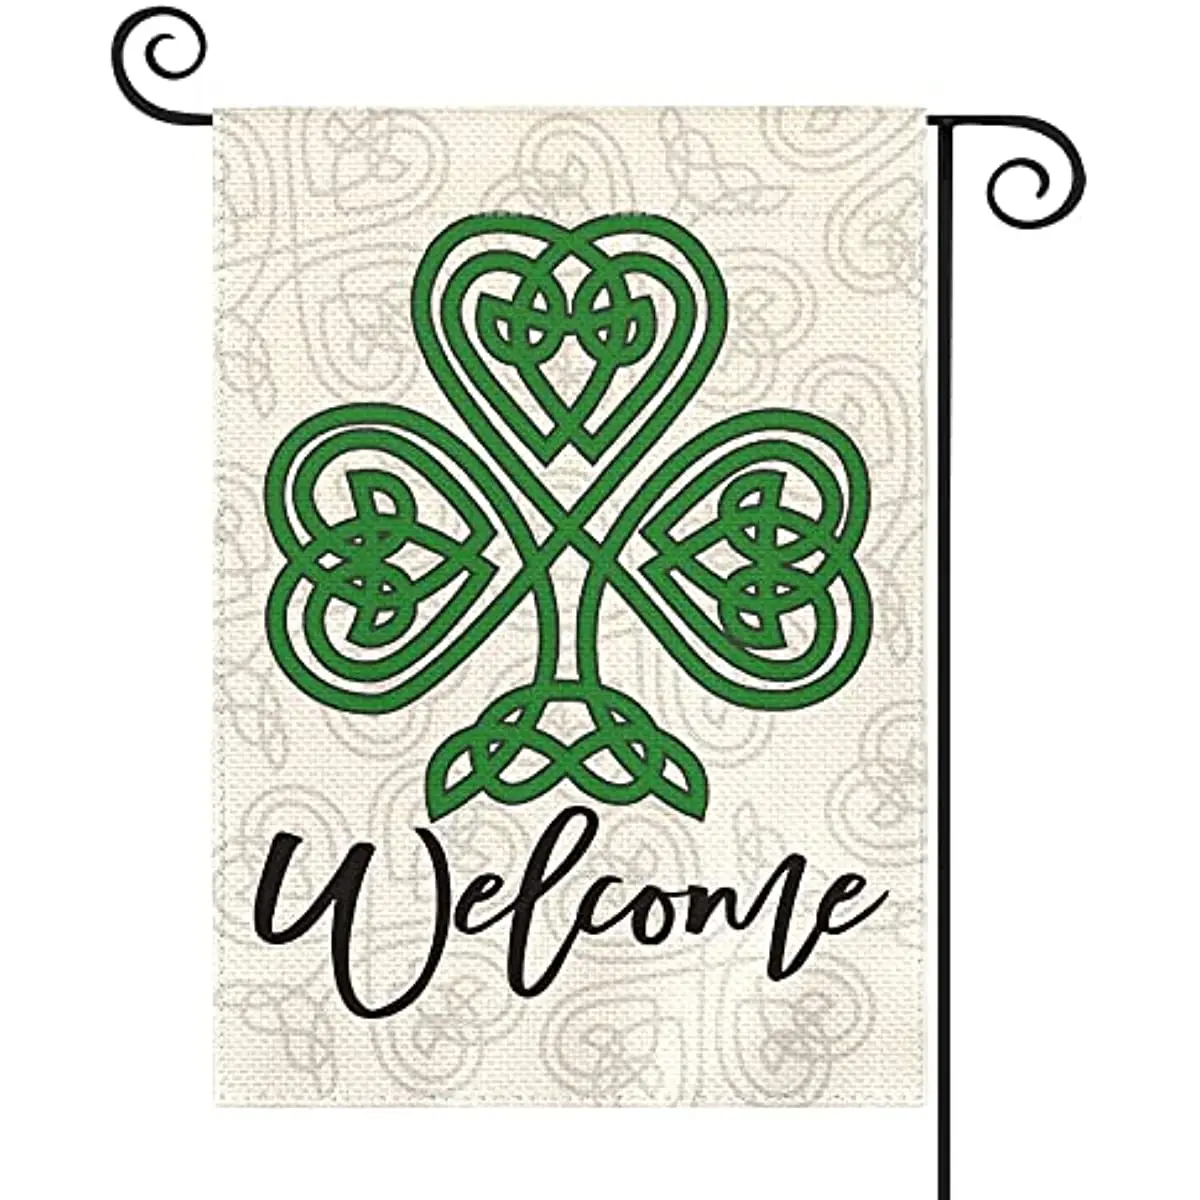 

St Patricks Day Cross Garden Flag 12x18 Inch Double Sided, Welcome Green Shamrock Clover Yard Outdoor Flag